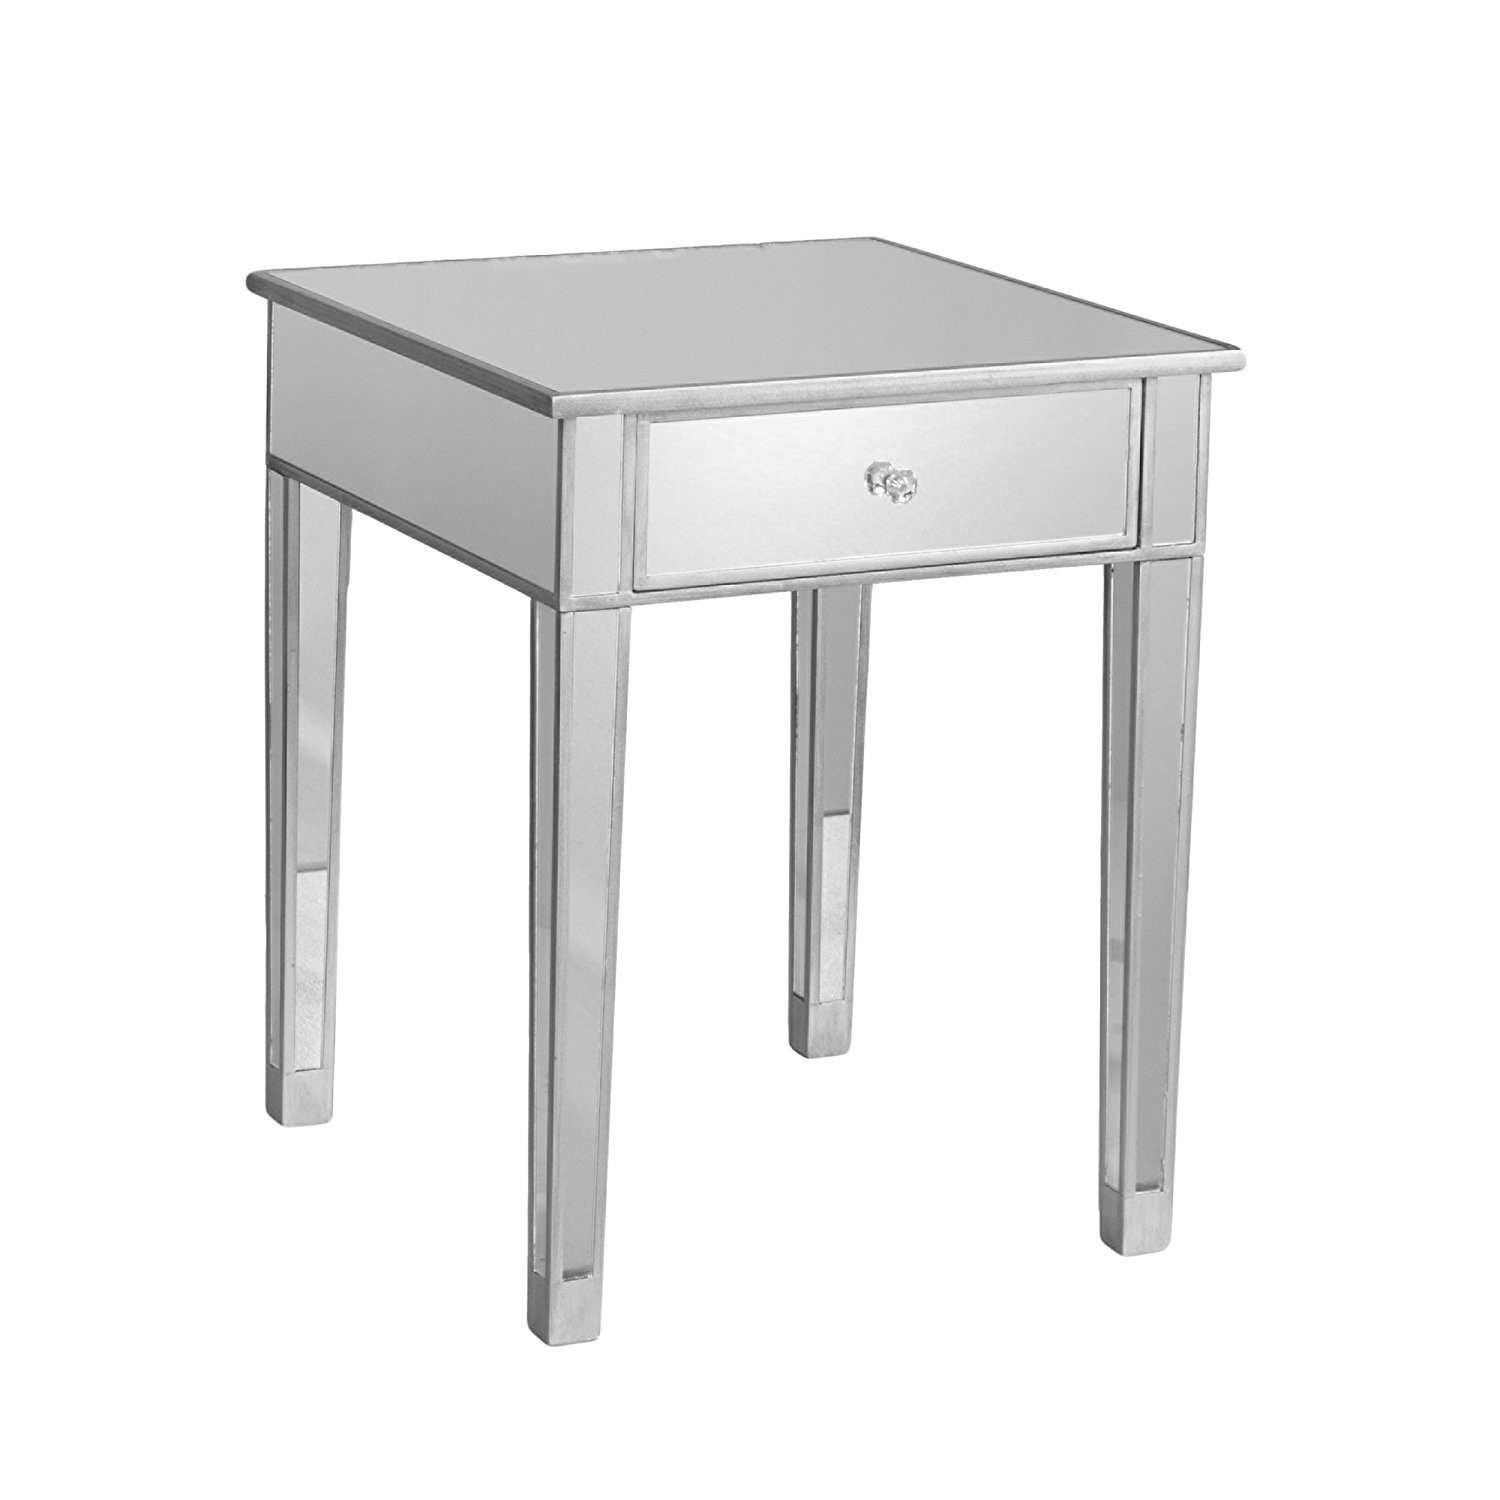 small bathroom accent tables for table best glass mirrored beautiful touch rustic legs living room storage chest concrete bench seat bunnings full length standing mirror thin